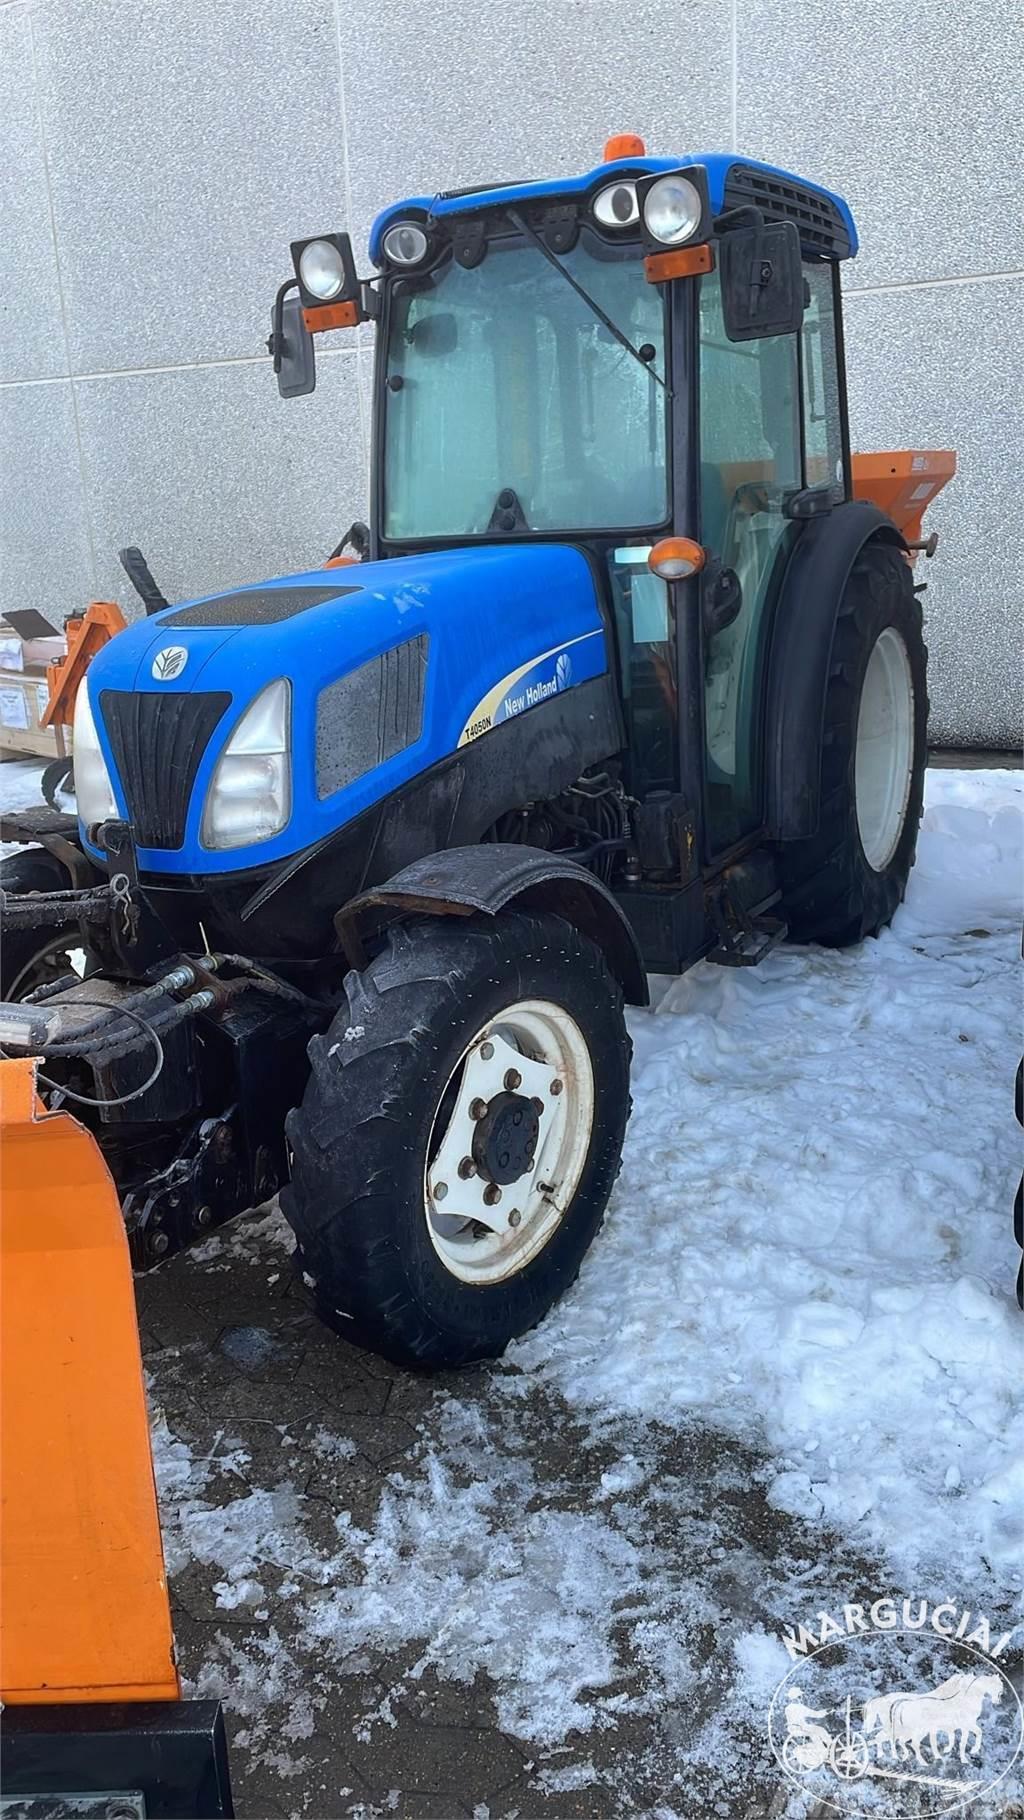 New Holland T4050N, 95 AG Tractoren